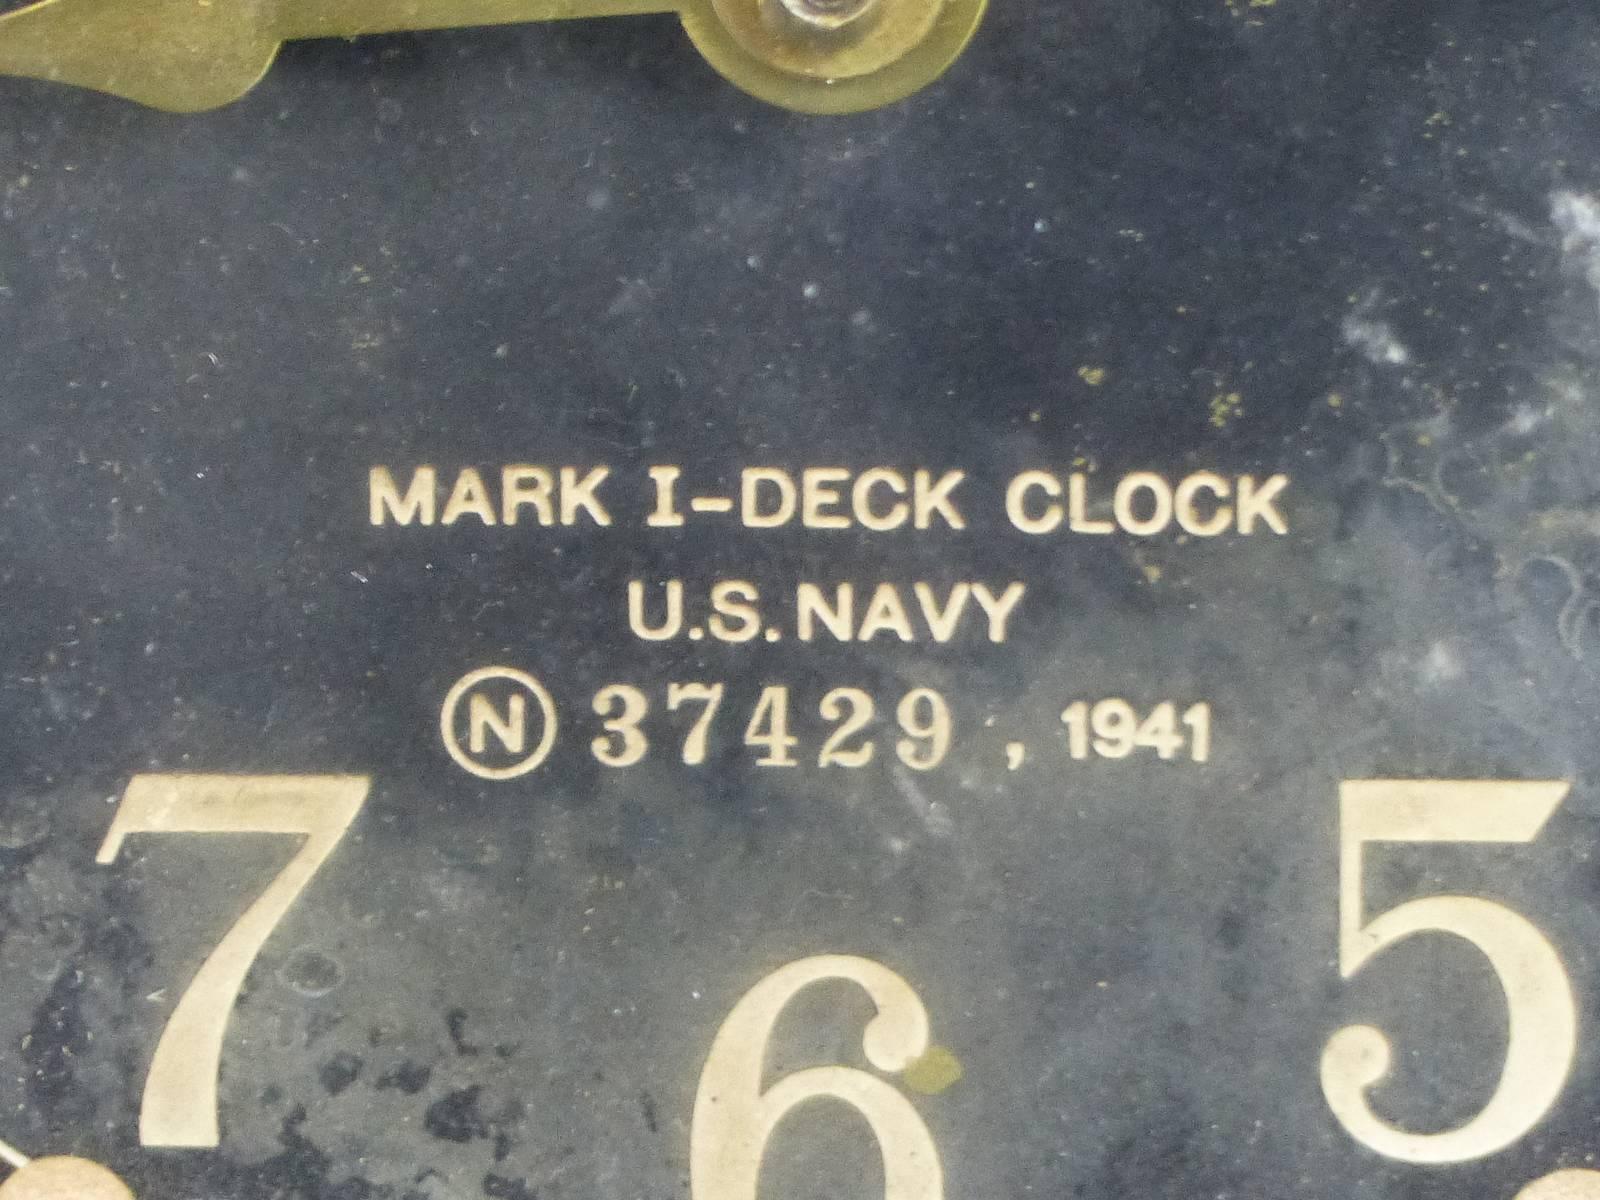 Presented is a Seth Thomas WW II ship's bulkhead clock which was manufactured in accordance with military specifications 18C-11 and 18C -13. This waterproof clock was made to be mounted on a bulkhead in the wardroom, bridge or ship's office. It has